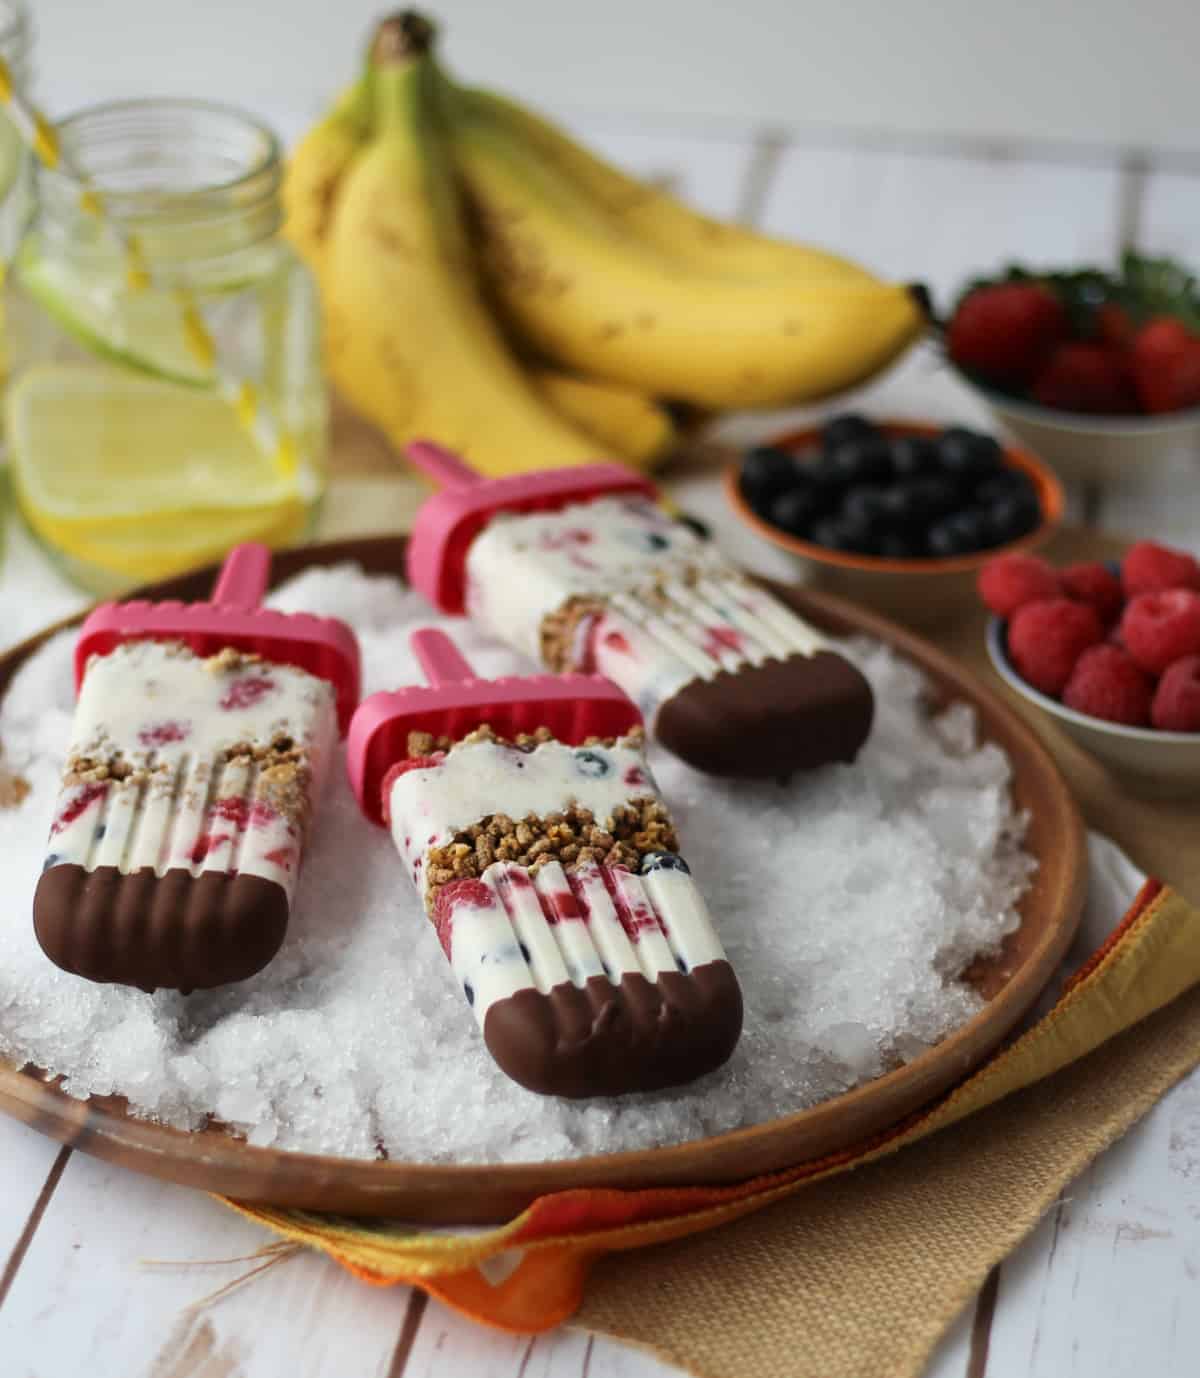 3 banana popsicles on ice with fruits in the background